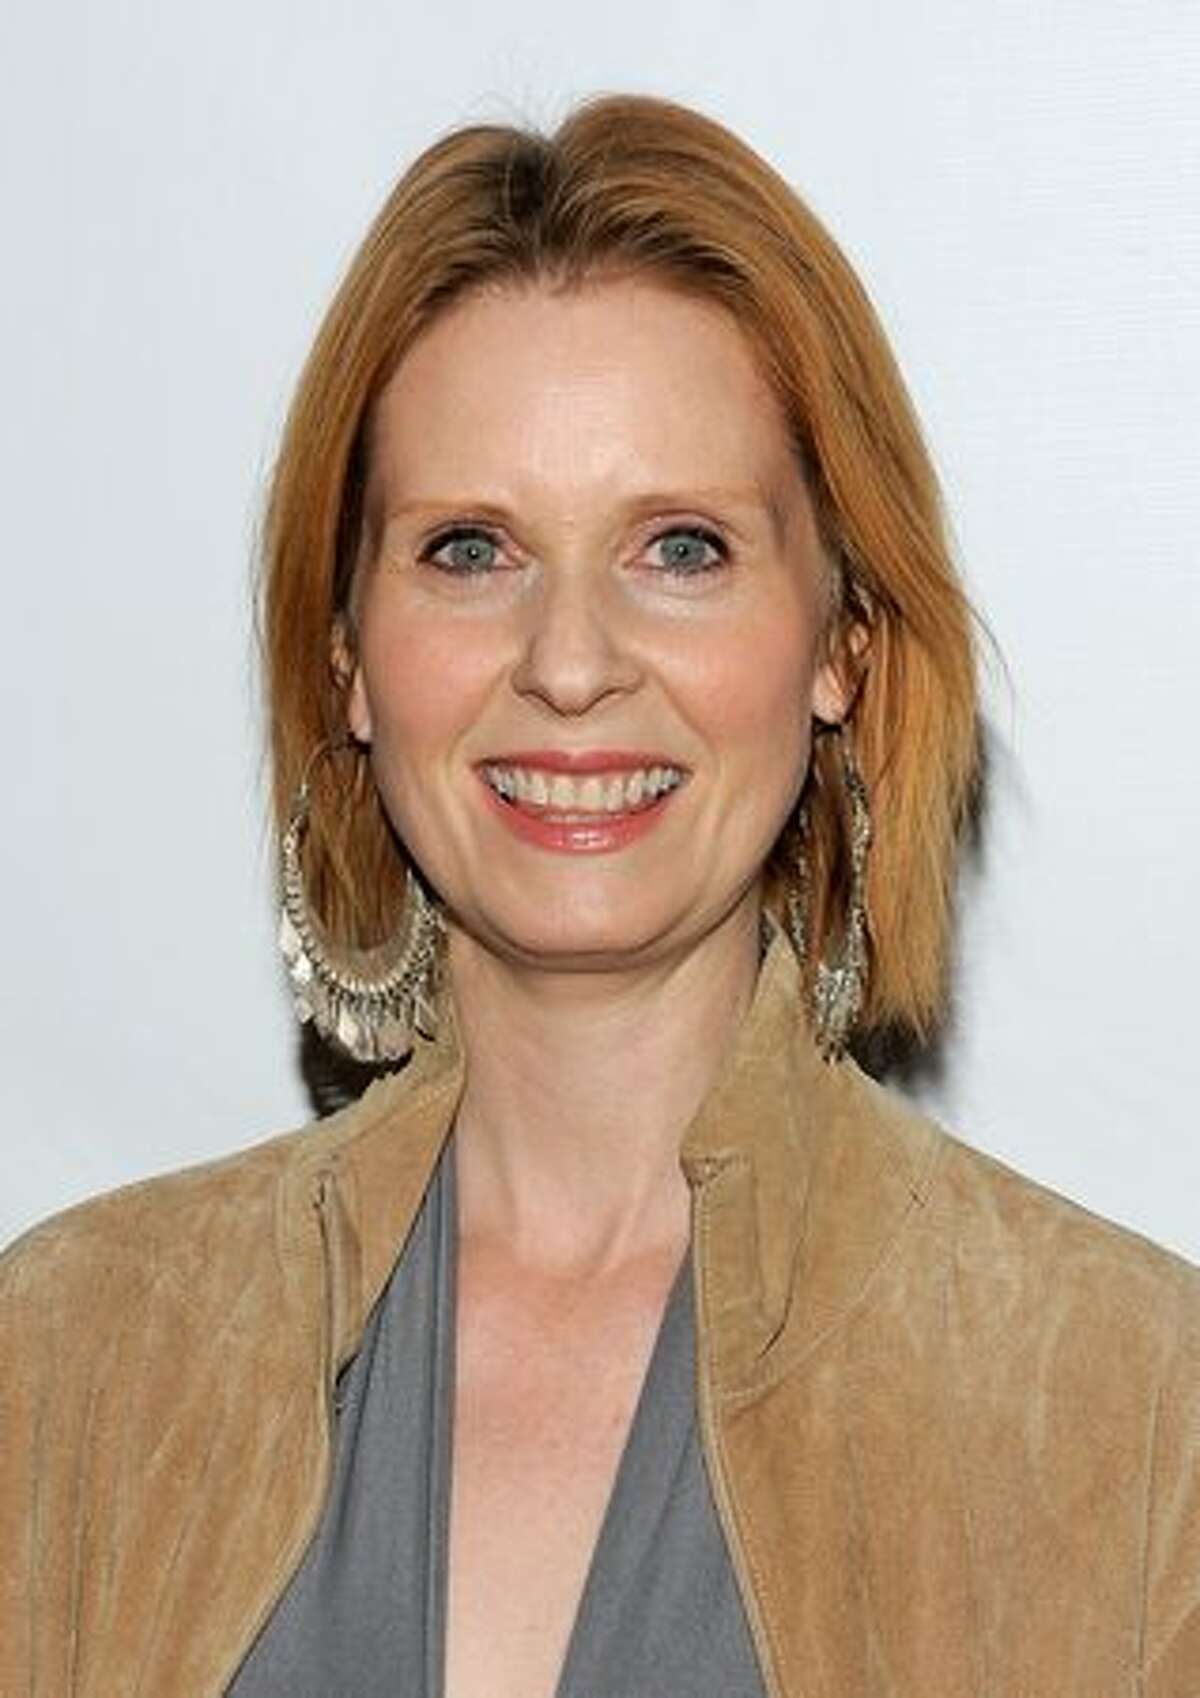 Actress Cynthia Nixon attends the Broadway opening of "RED" at the John Golden Theatre in New York City.